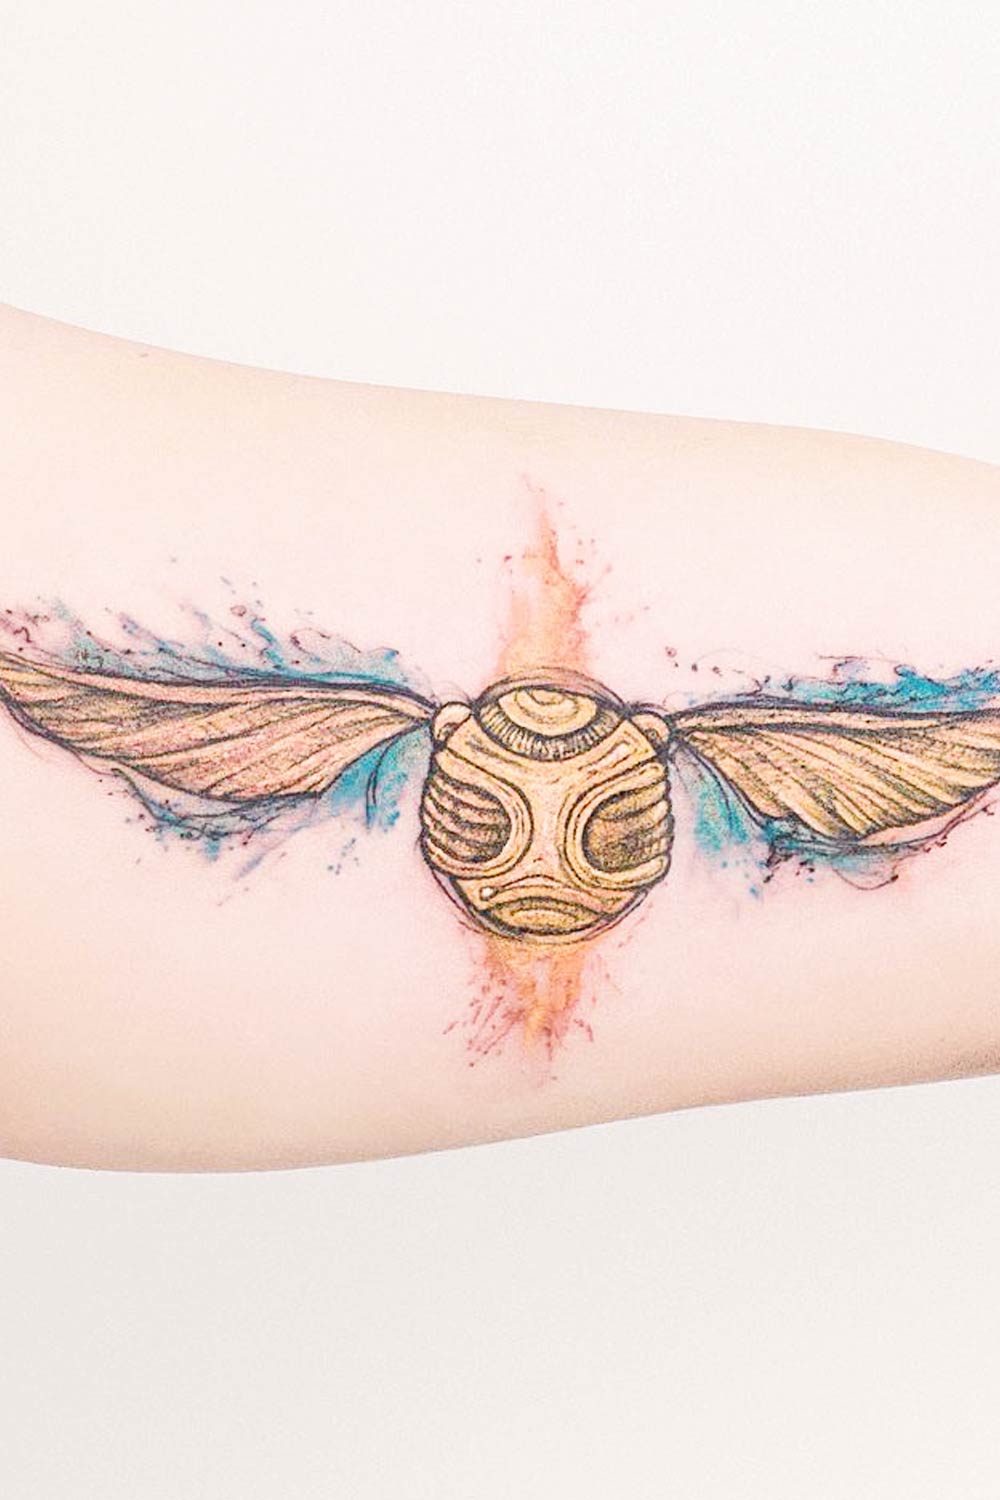 Watercolor Golden Snitch Tattoo